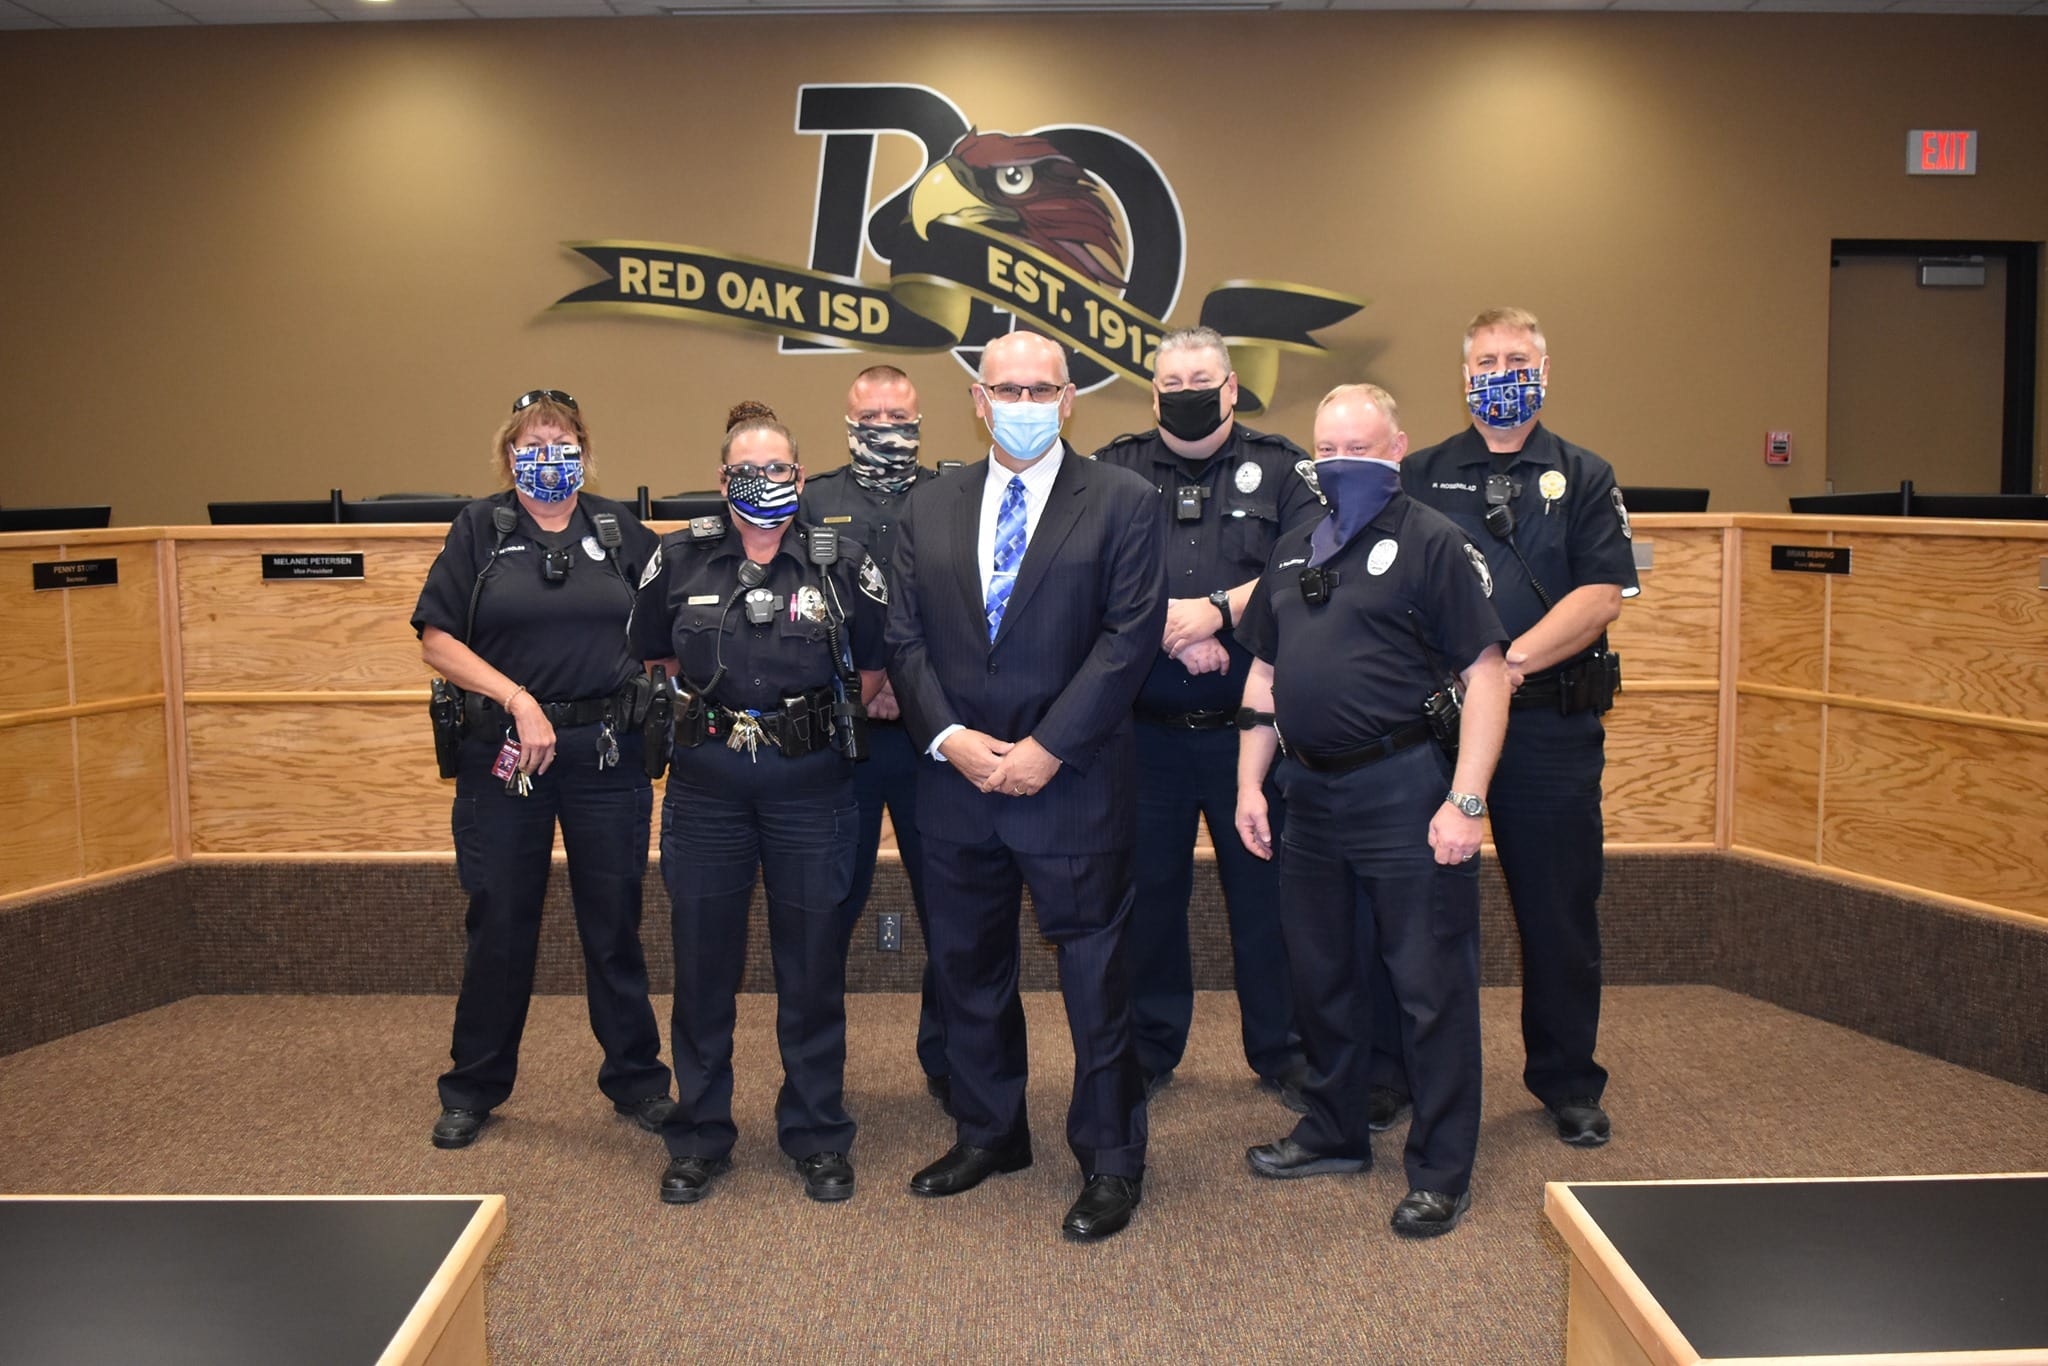 Red Oak ISD Police Officers